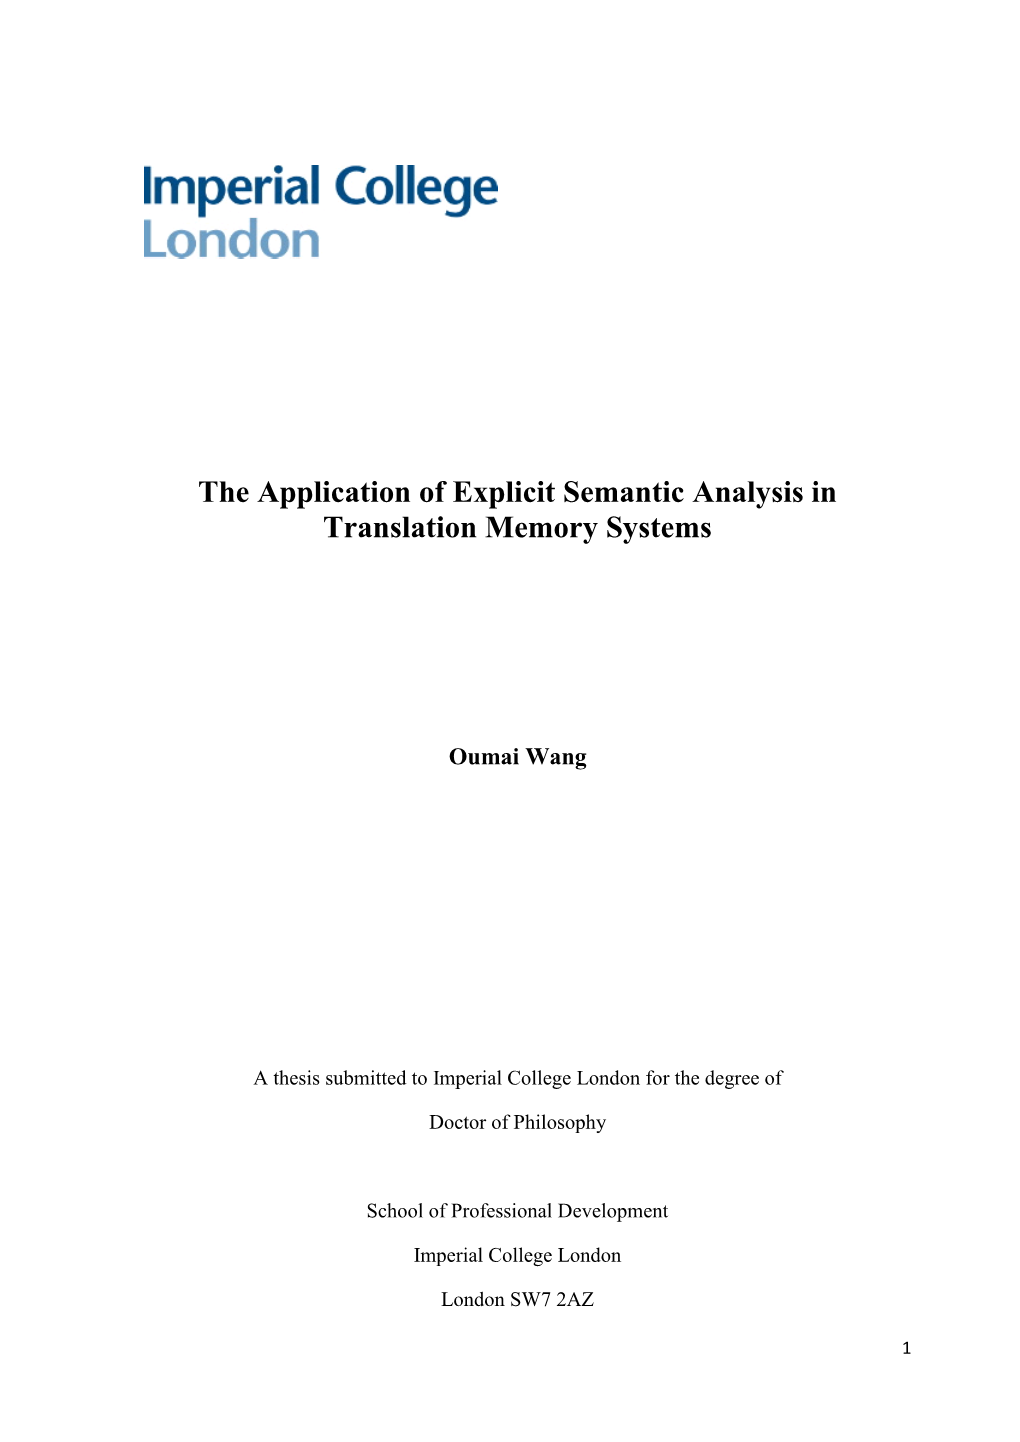 The Application of Explicit Semantic Analysis in Translation Memory Systems